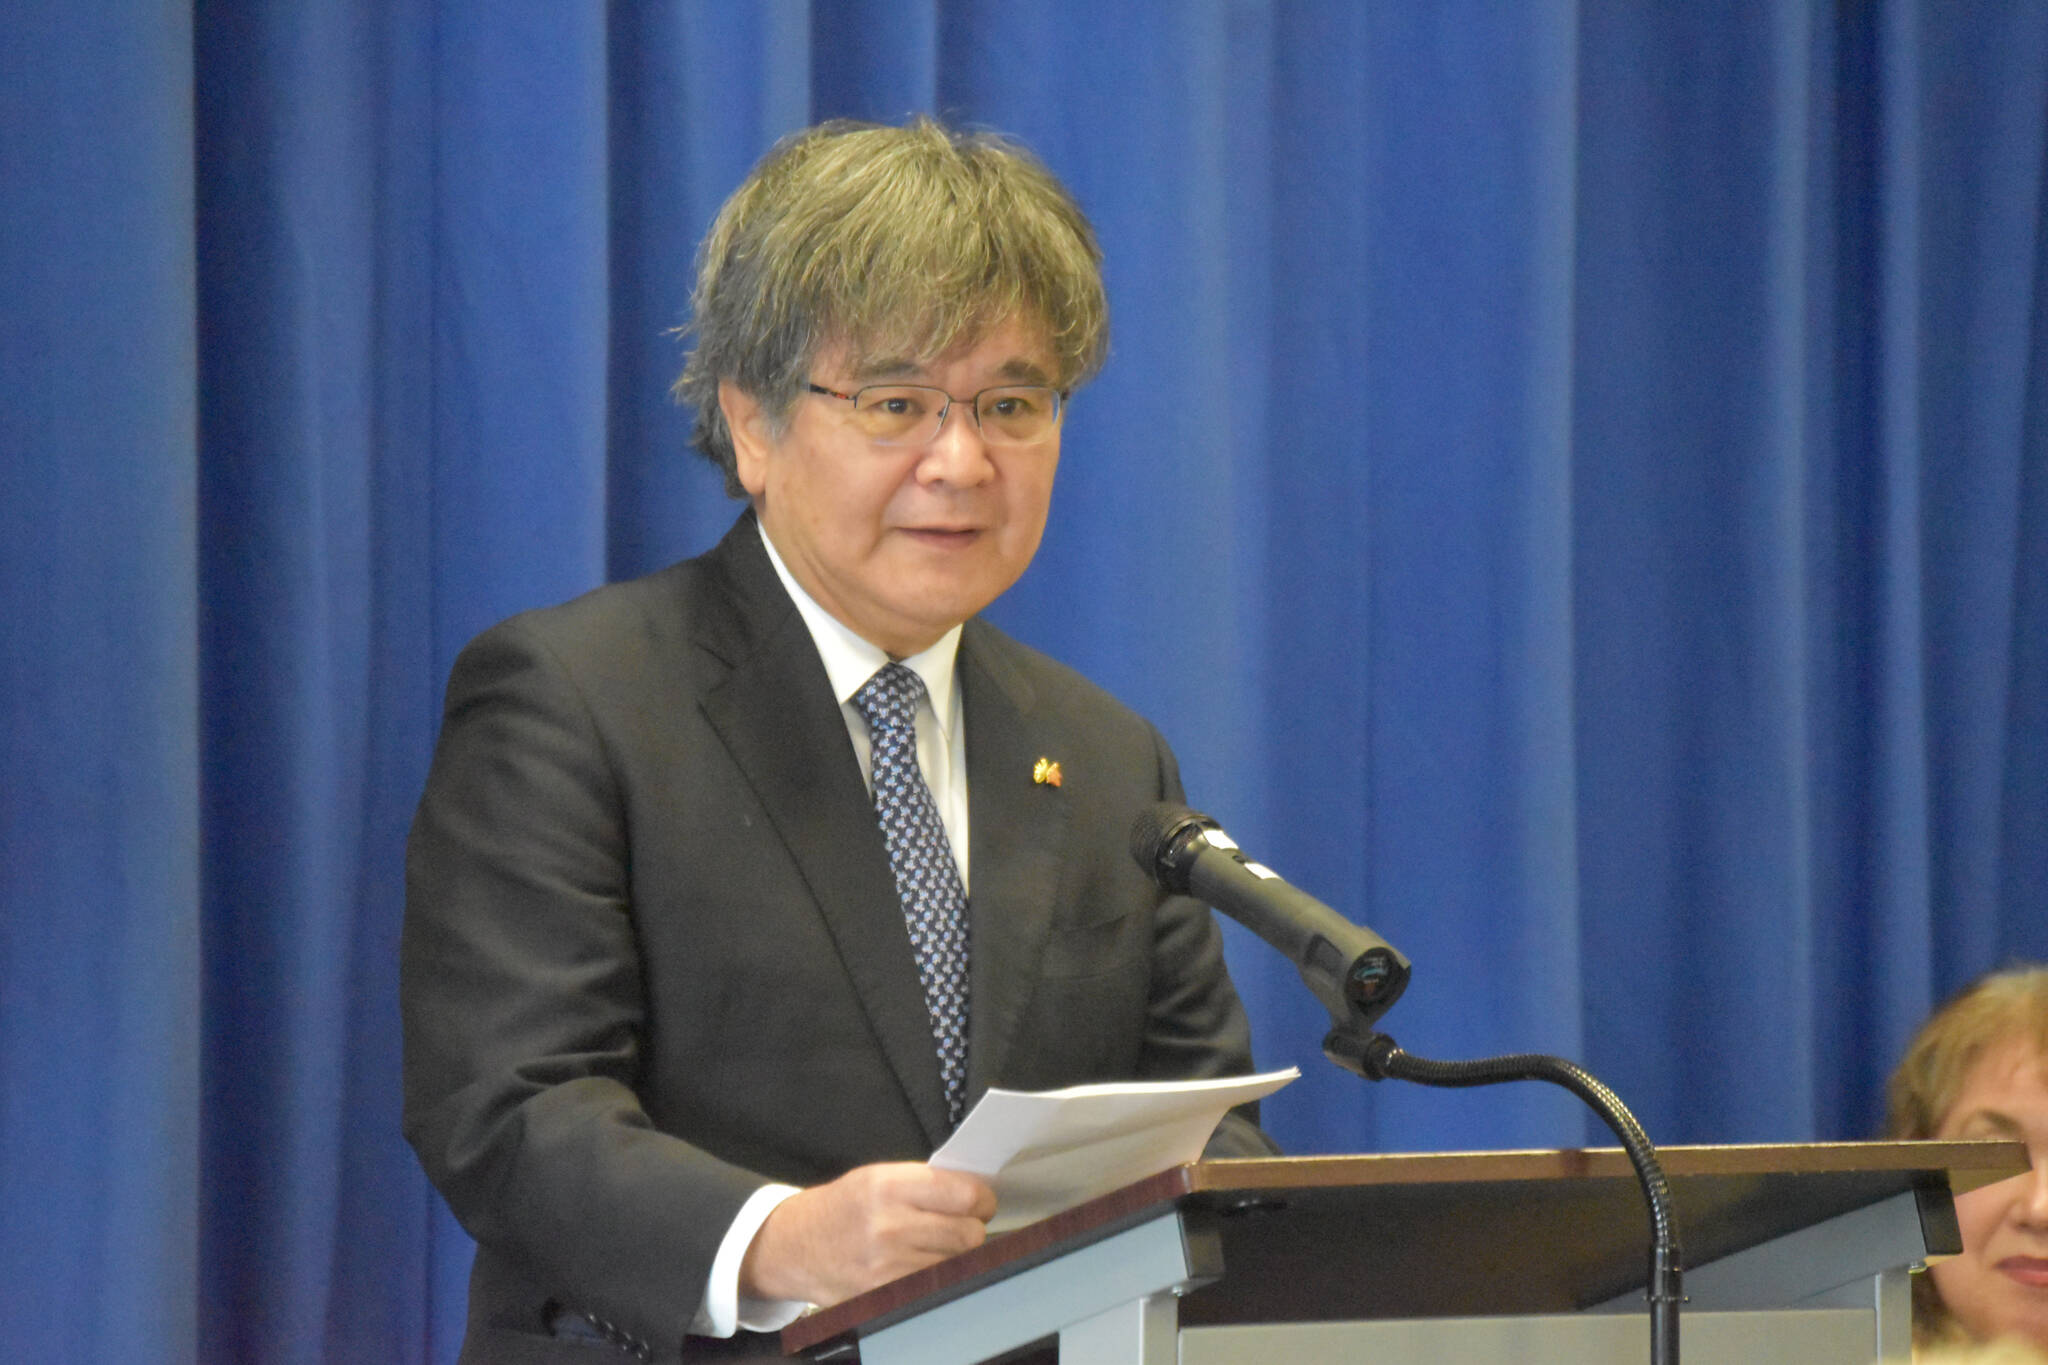 Consular Masaru Aniya speaks at a commendation ceremony where he bestowed Yasuko Lehtinen with the Foreign Minister Commendation on Friday, Oct. 28, 2022, at Kenai Peninsula College in Soldotna, Alaska. (Jake Dye/Peninsula Clarion)